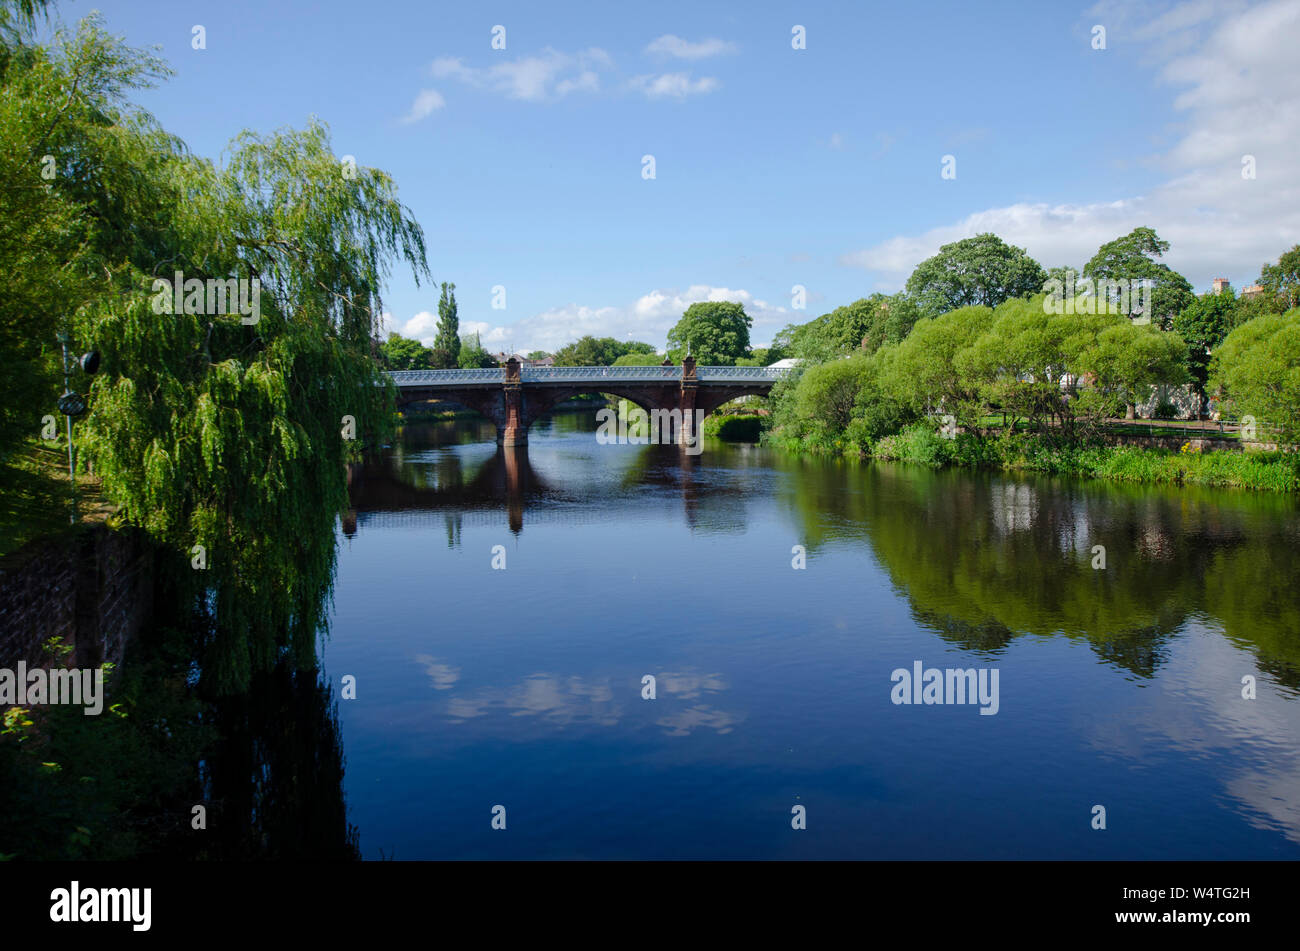 General view of Dumfries Scotland UK with the River Nith in the foreground Stock Photo